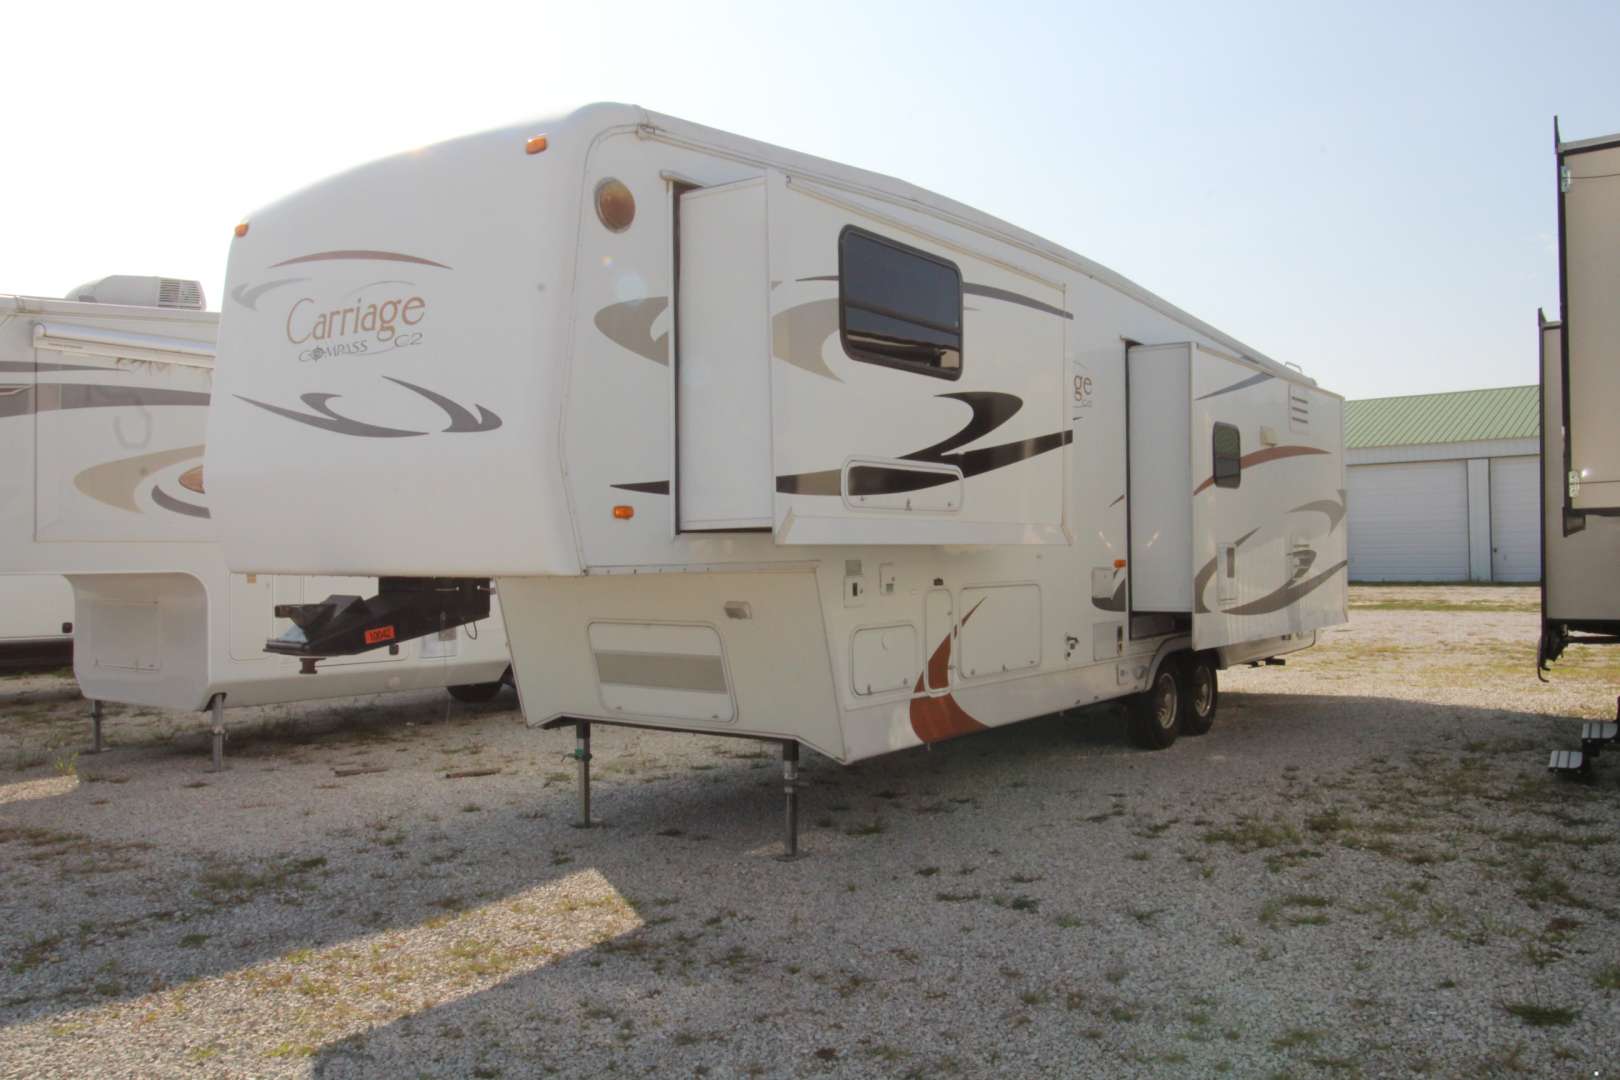 2006 Carriage Cameo LXI 35FD3 #CC06007 | Big Adventure RV in Hermitage 2006 Carriage Cameo Lxi 5th Wheel